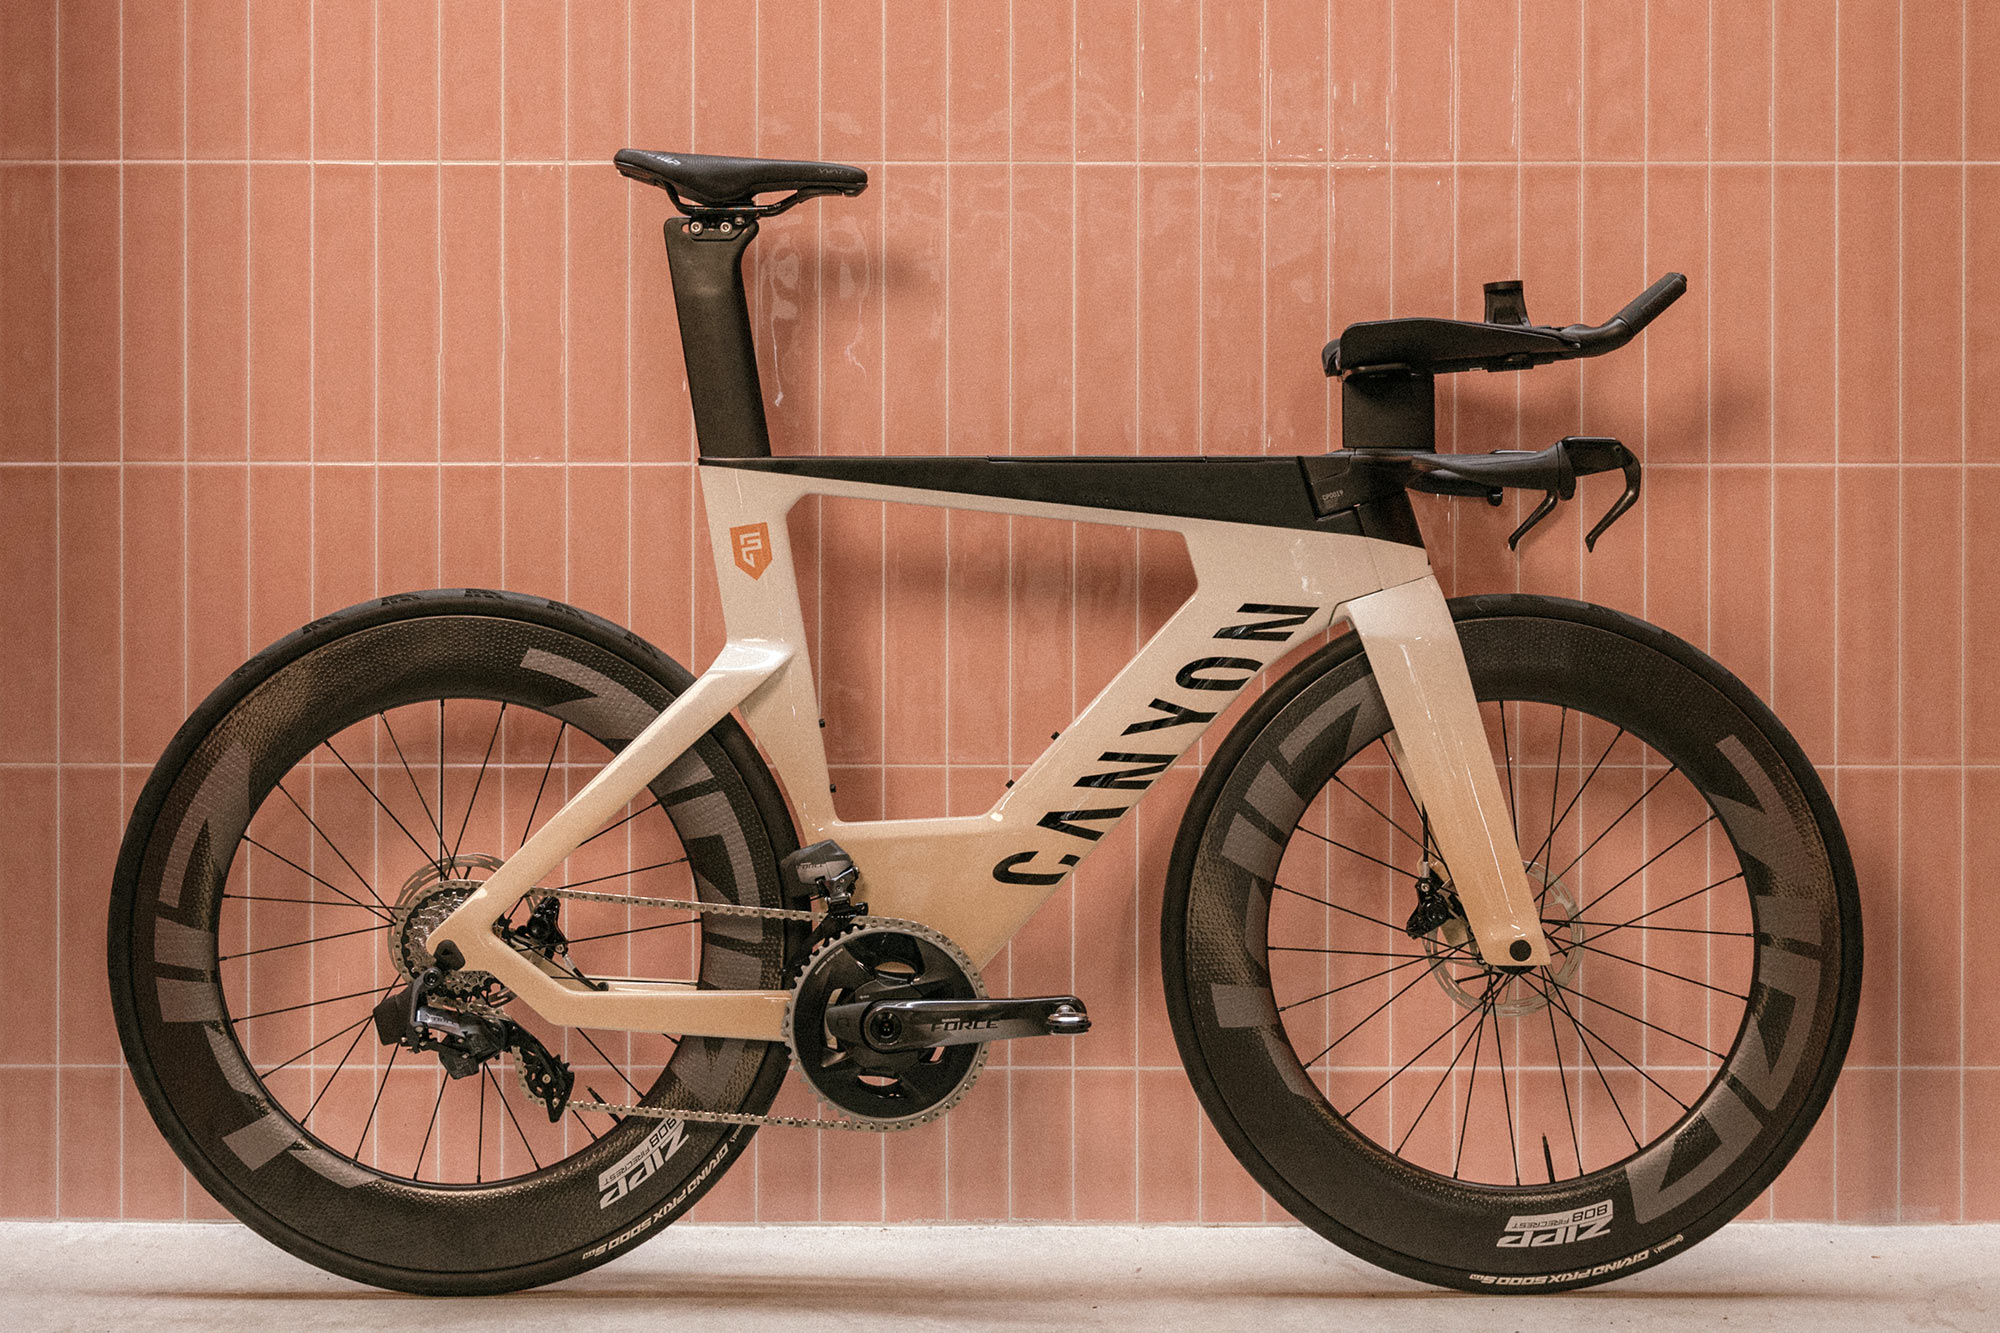 Canyon Ltd Speedmax Frodissimo Triathlon Bike is Painted with Frodeno’s Own Coffee